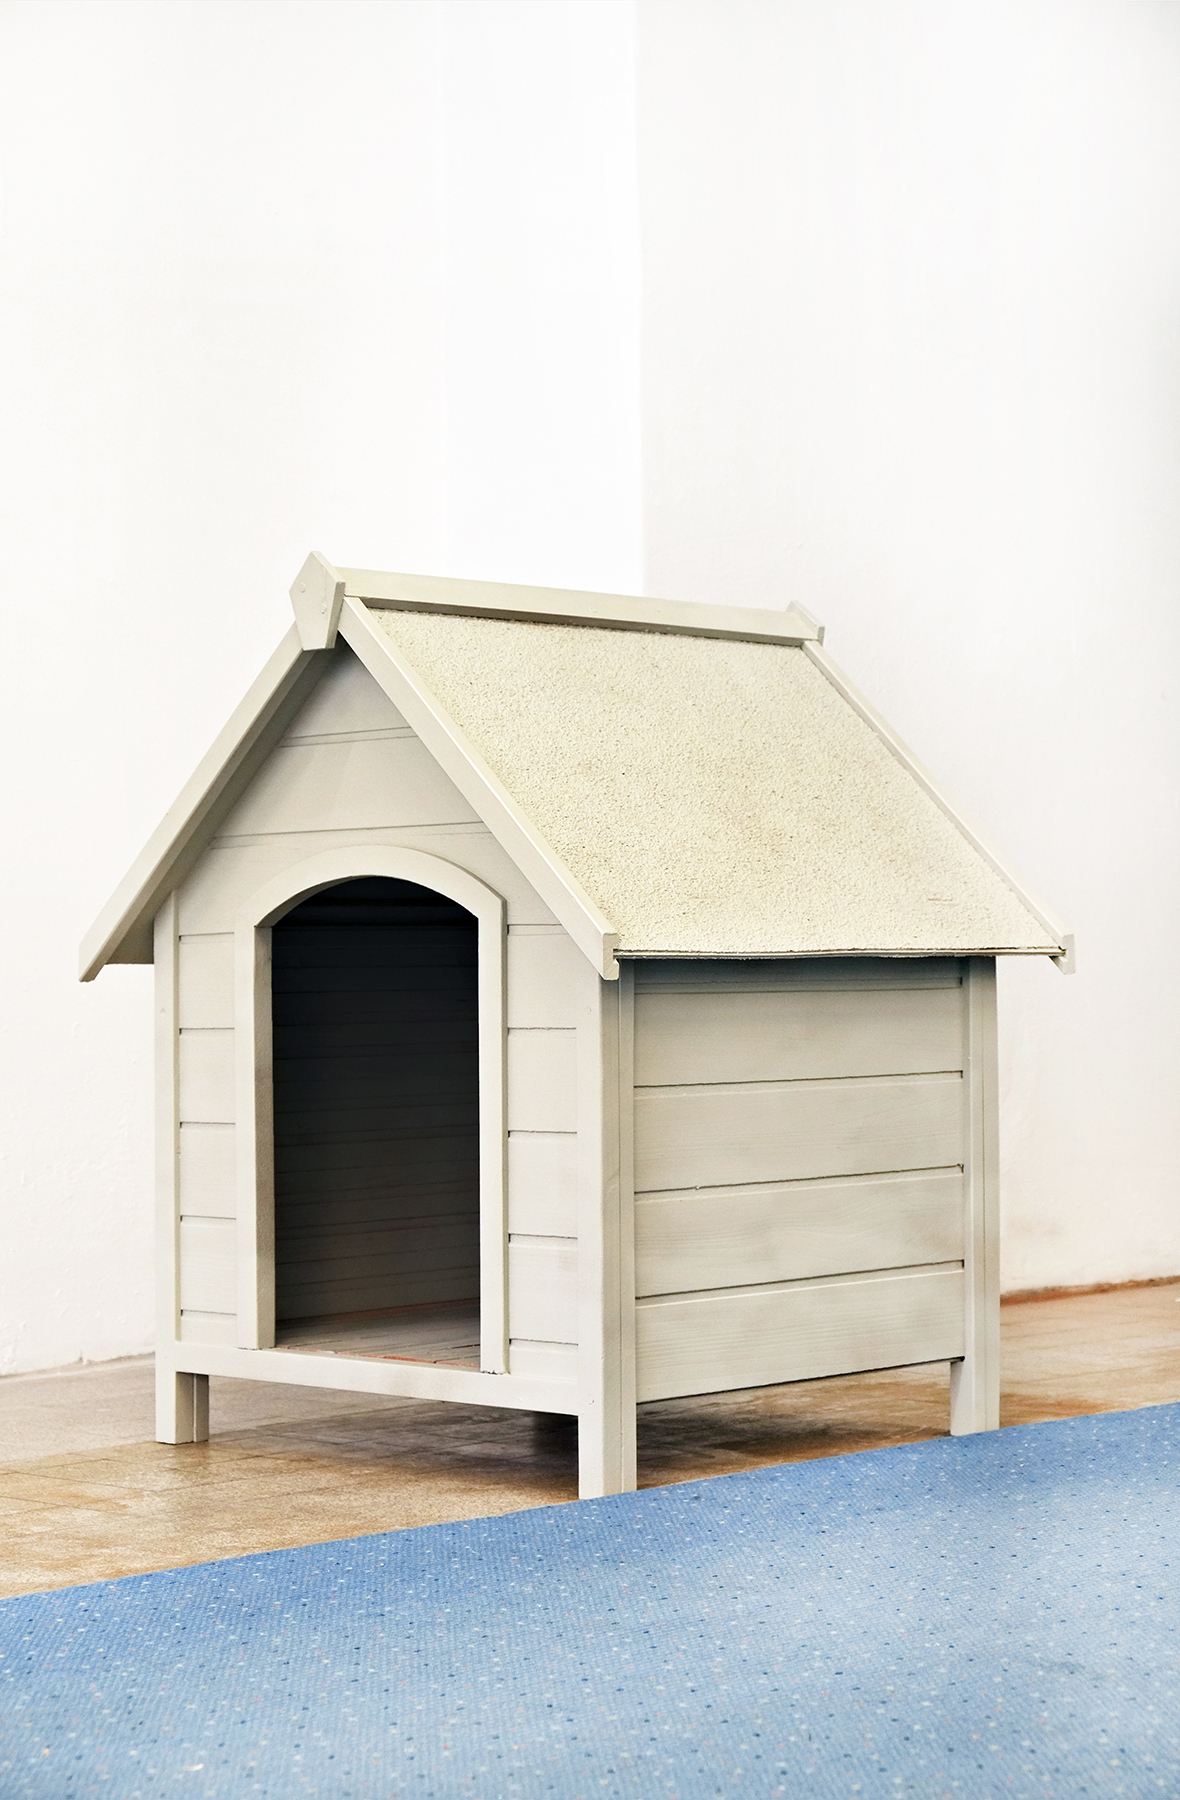 Svenja Björg Wassill, "Extended Evolutionary Synthesis“, 2020, wooden doghouse and acrylic paint, 85 x 71 x 68 cm